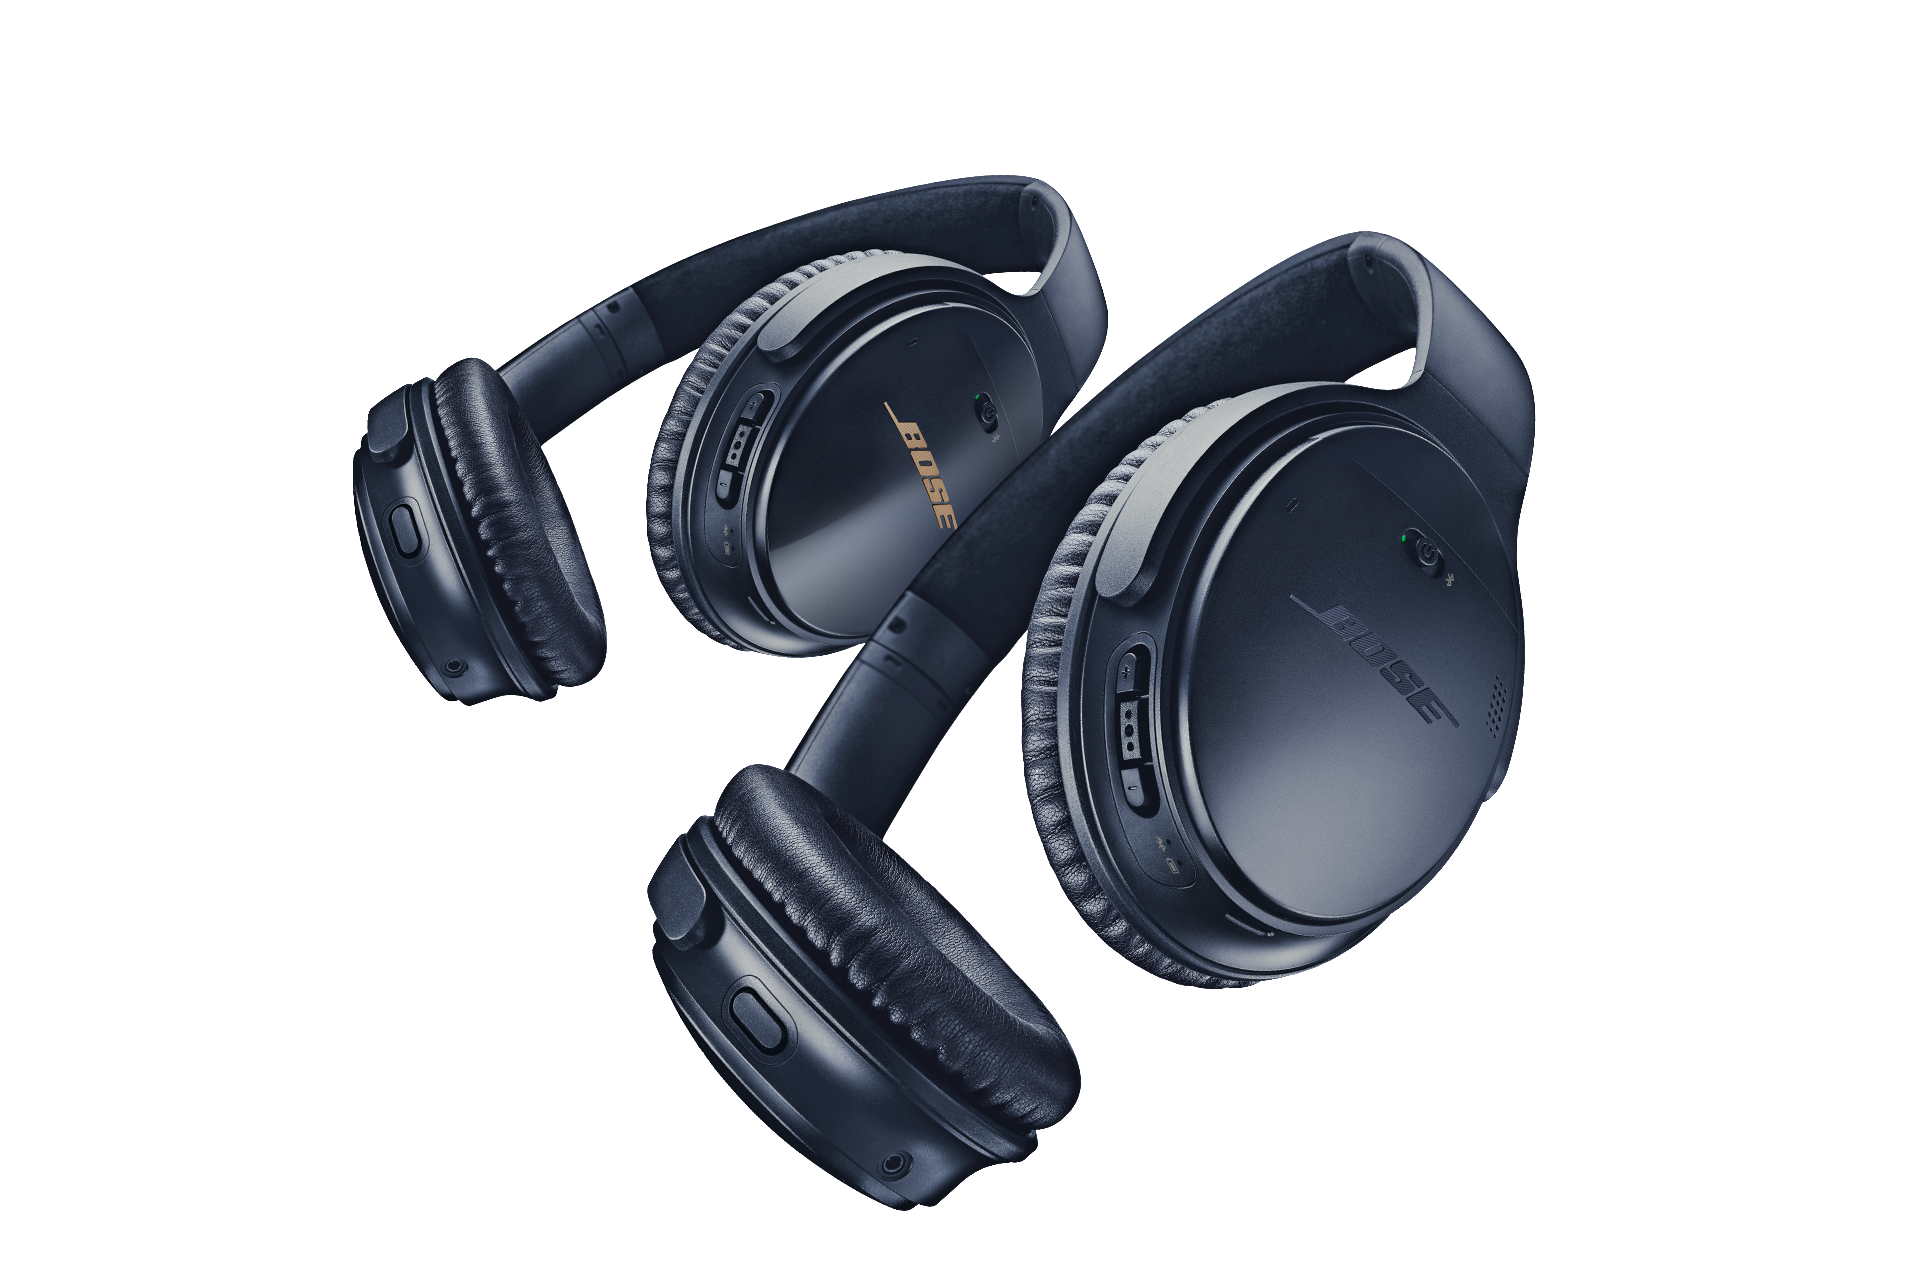 The Bose Noise Cancelling Headphones travel product recommended by Himadri Karani Mehta on Lifney.